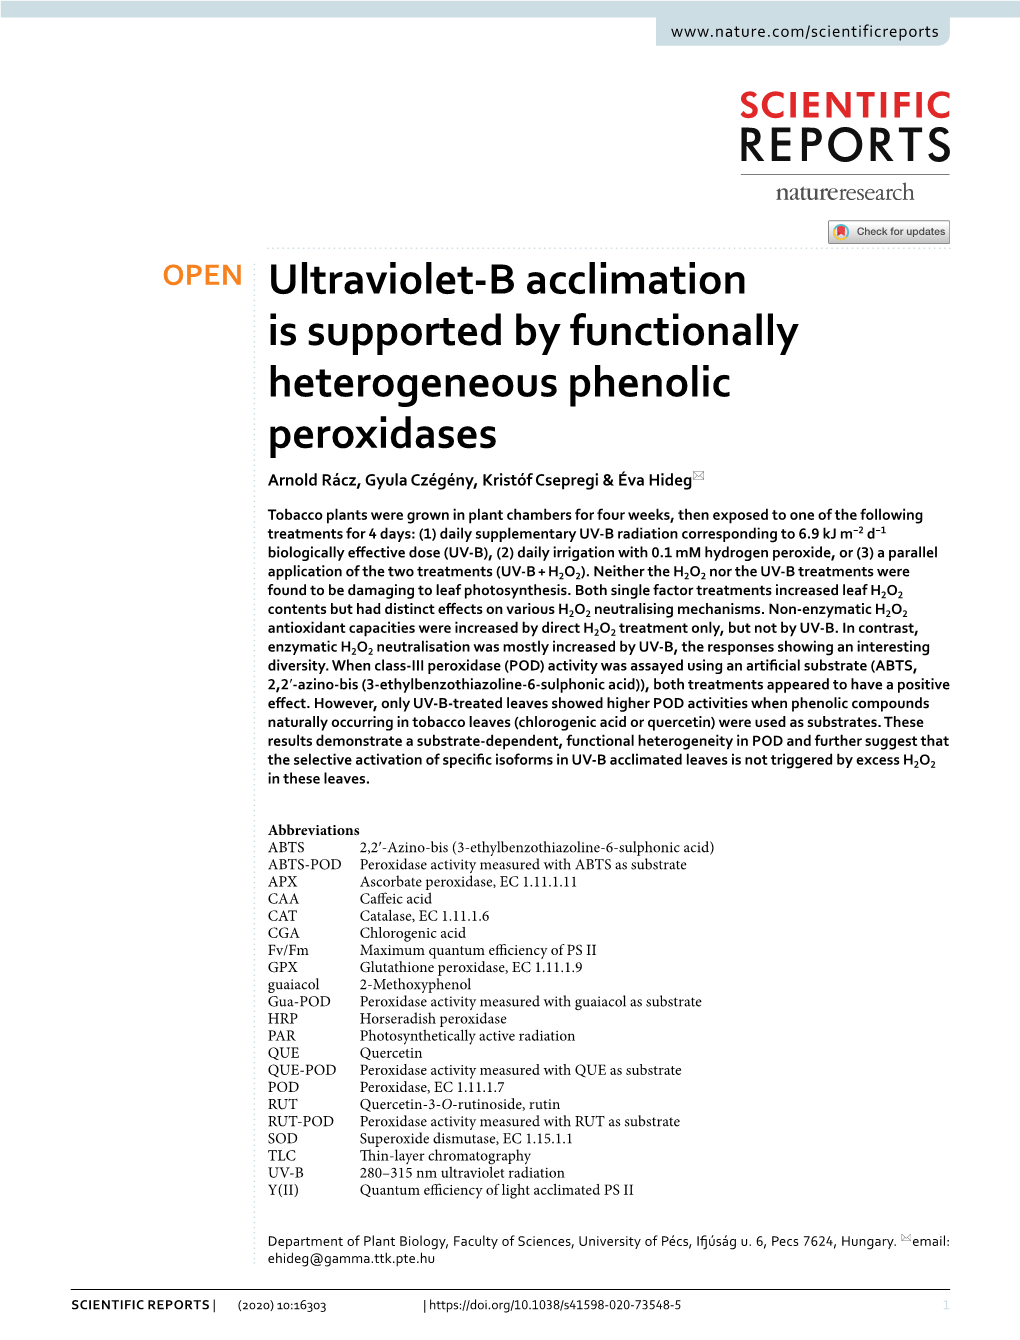 Ultraviolet-B Acclimation Is Supported by Functionally Heterogeneous